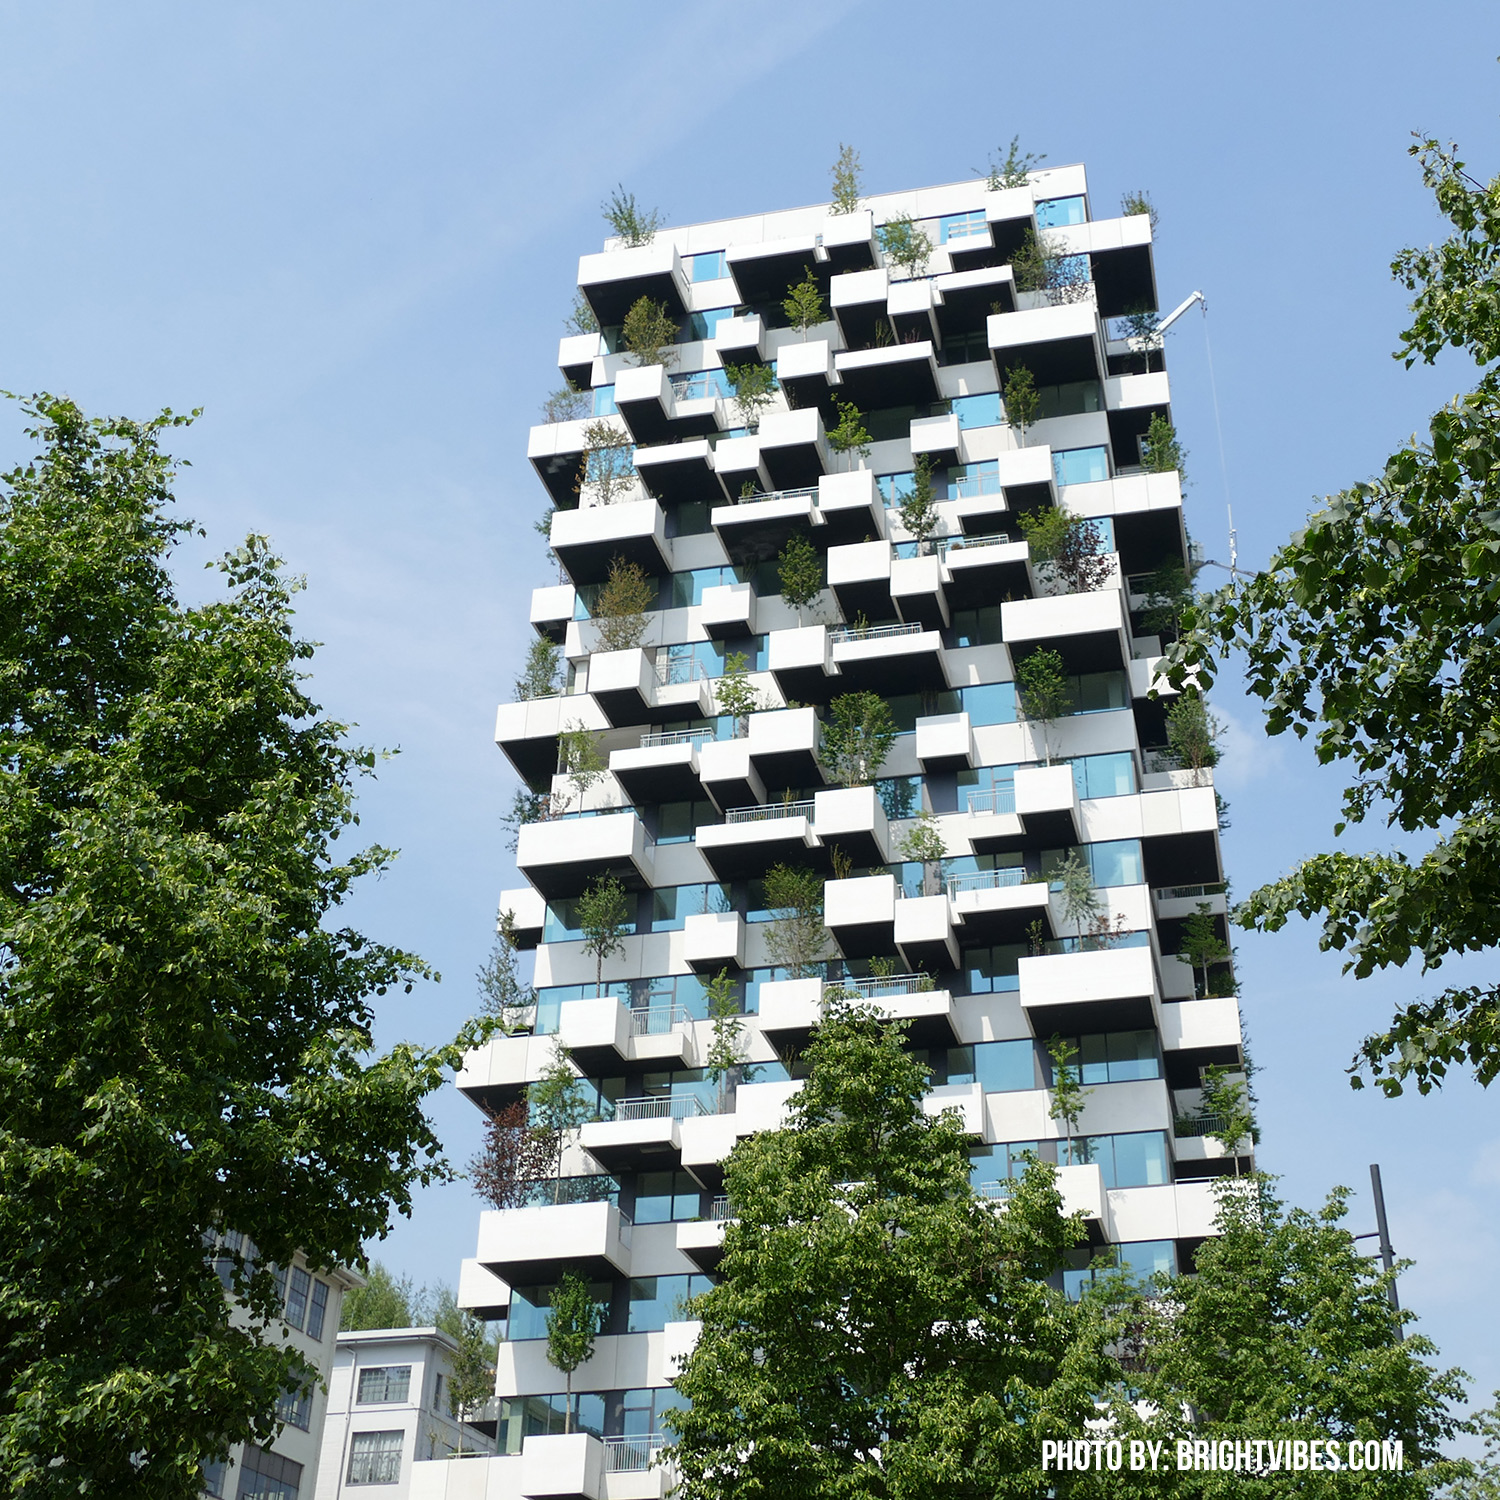 The expertise of architect Stefano Boeri, who is already internationally renowned for the green residential towers in Milan, was commissioned by the Sint-Trudo housing association for the realisation of a green apartment complex on Strijp-S.